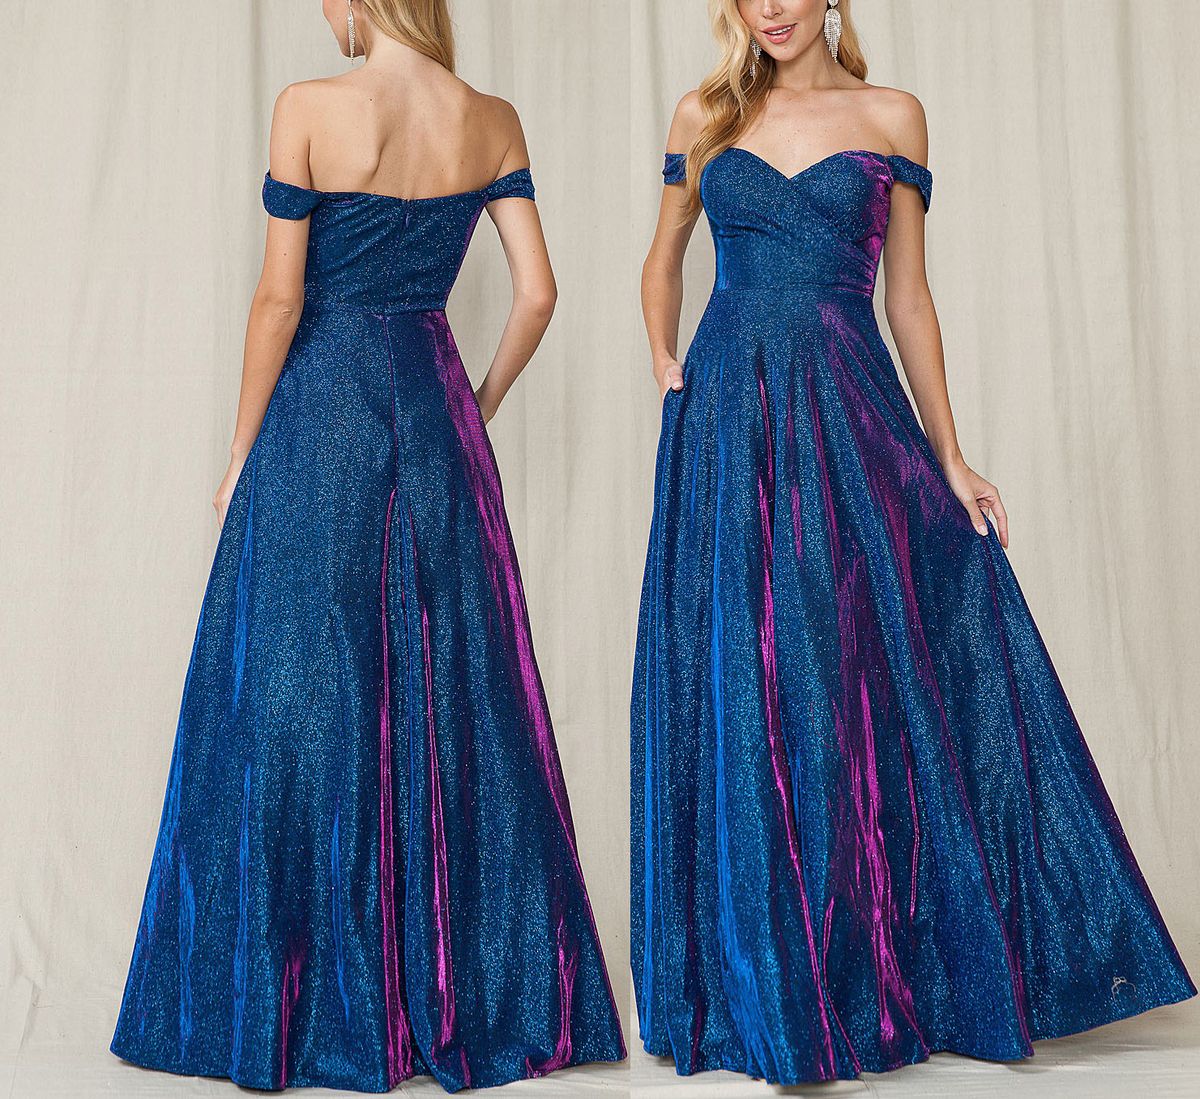 Style Electric Blue Off The Shoulder Sweetheart Metallic Formal Prom Ball Gown Dress Size 6 Prom Off The Shoulder Blue Ball Gown on Queenly